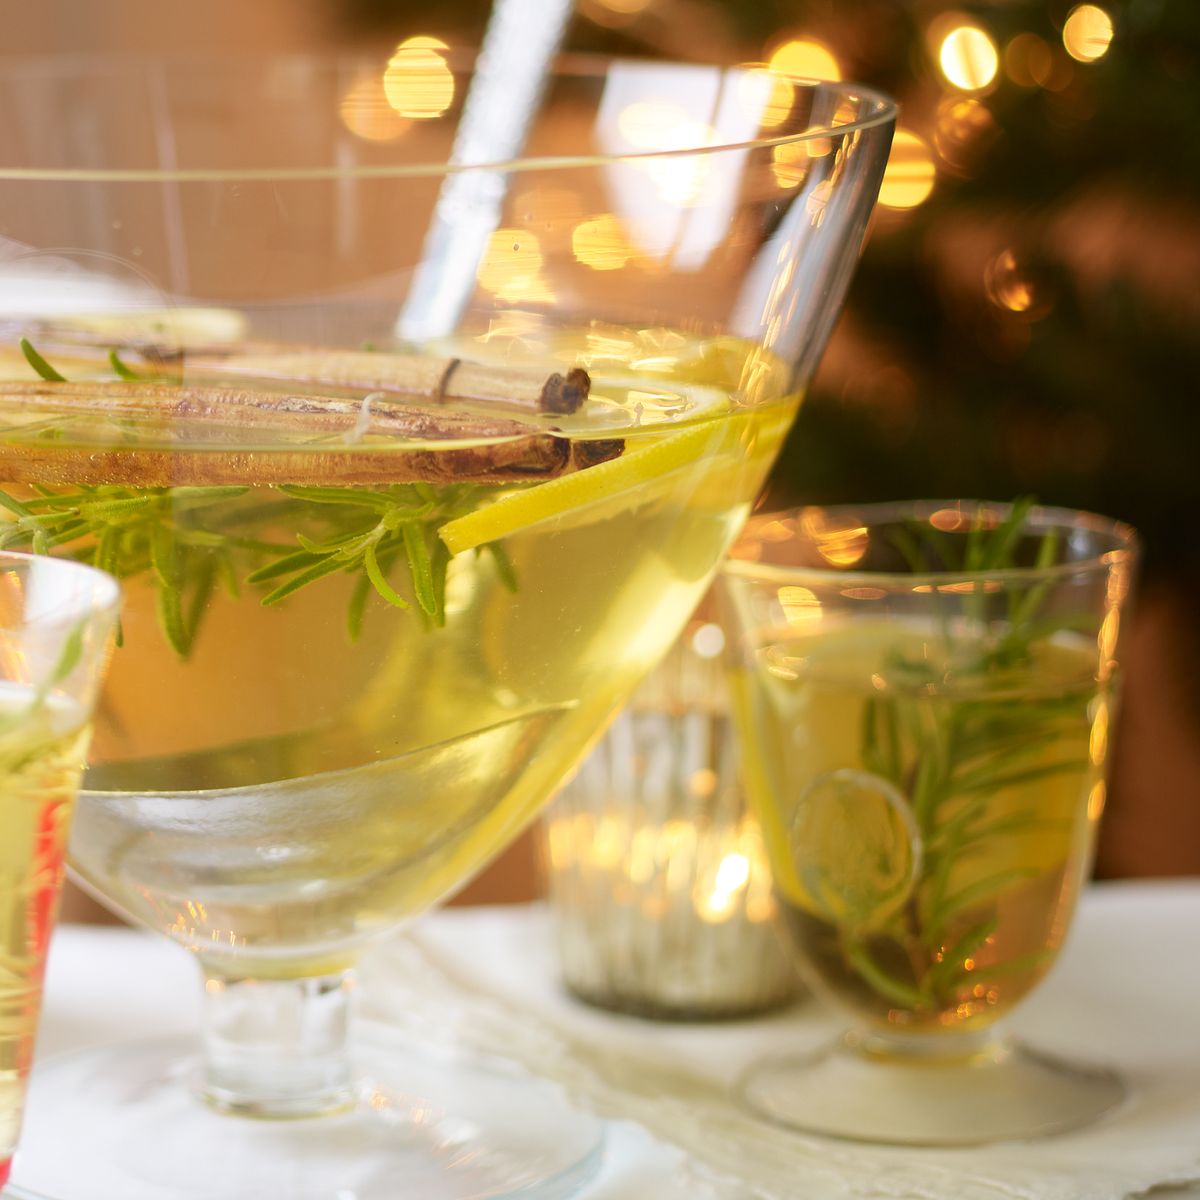 Friends and family will love this quirky twist on a classic mulled wine recipe